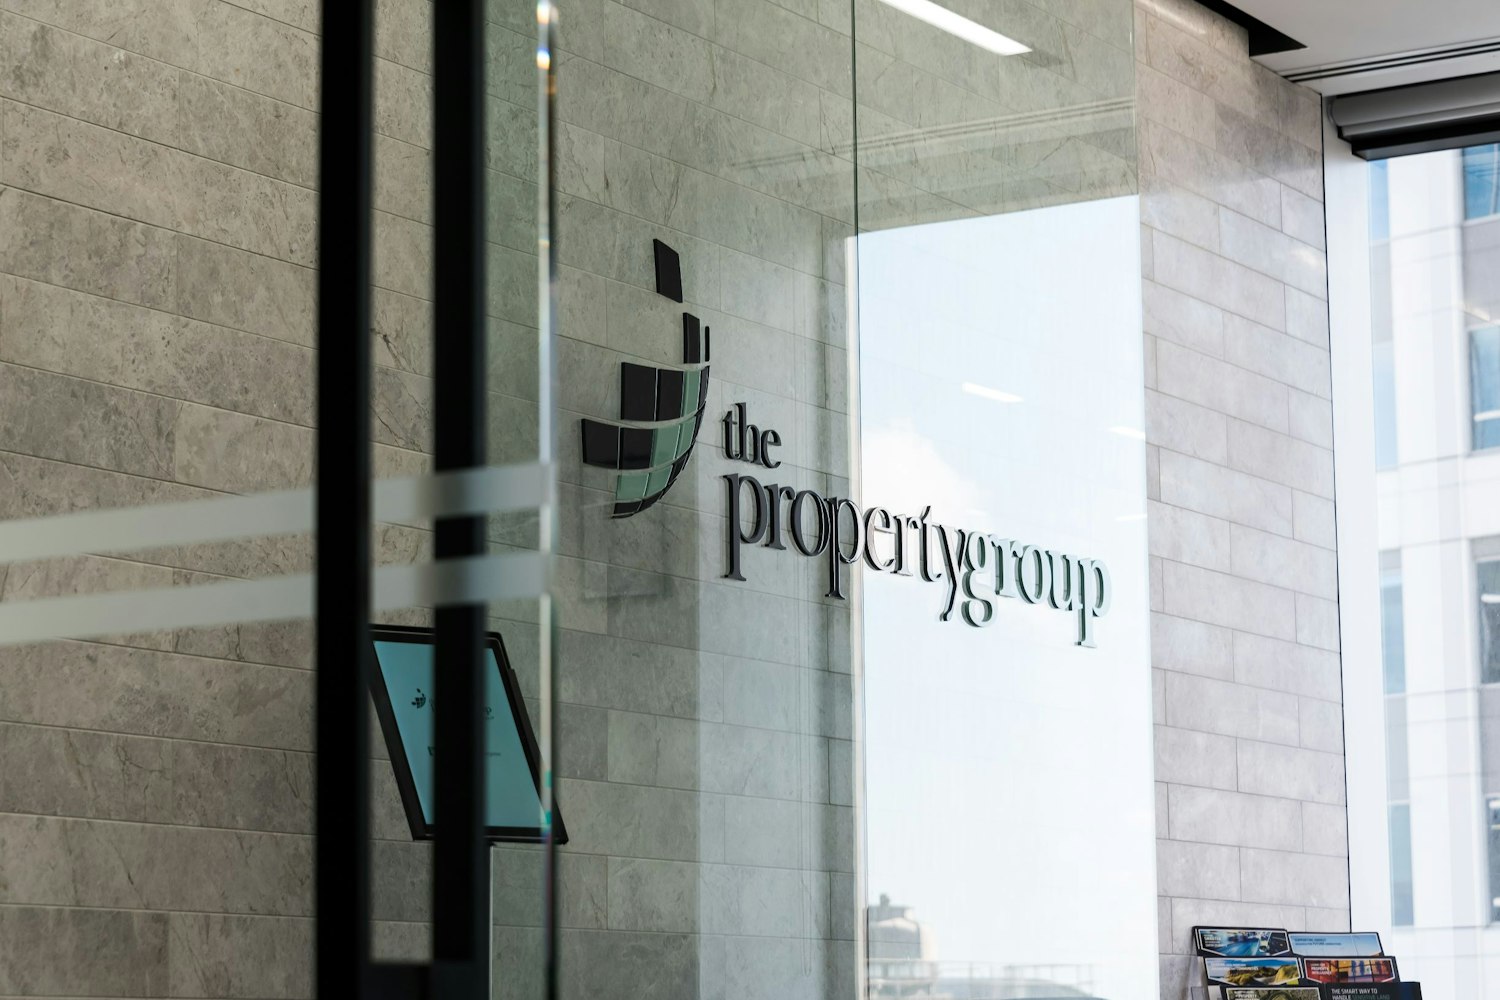 The property group sign